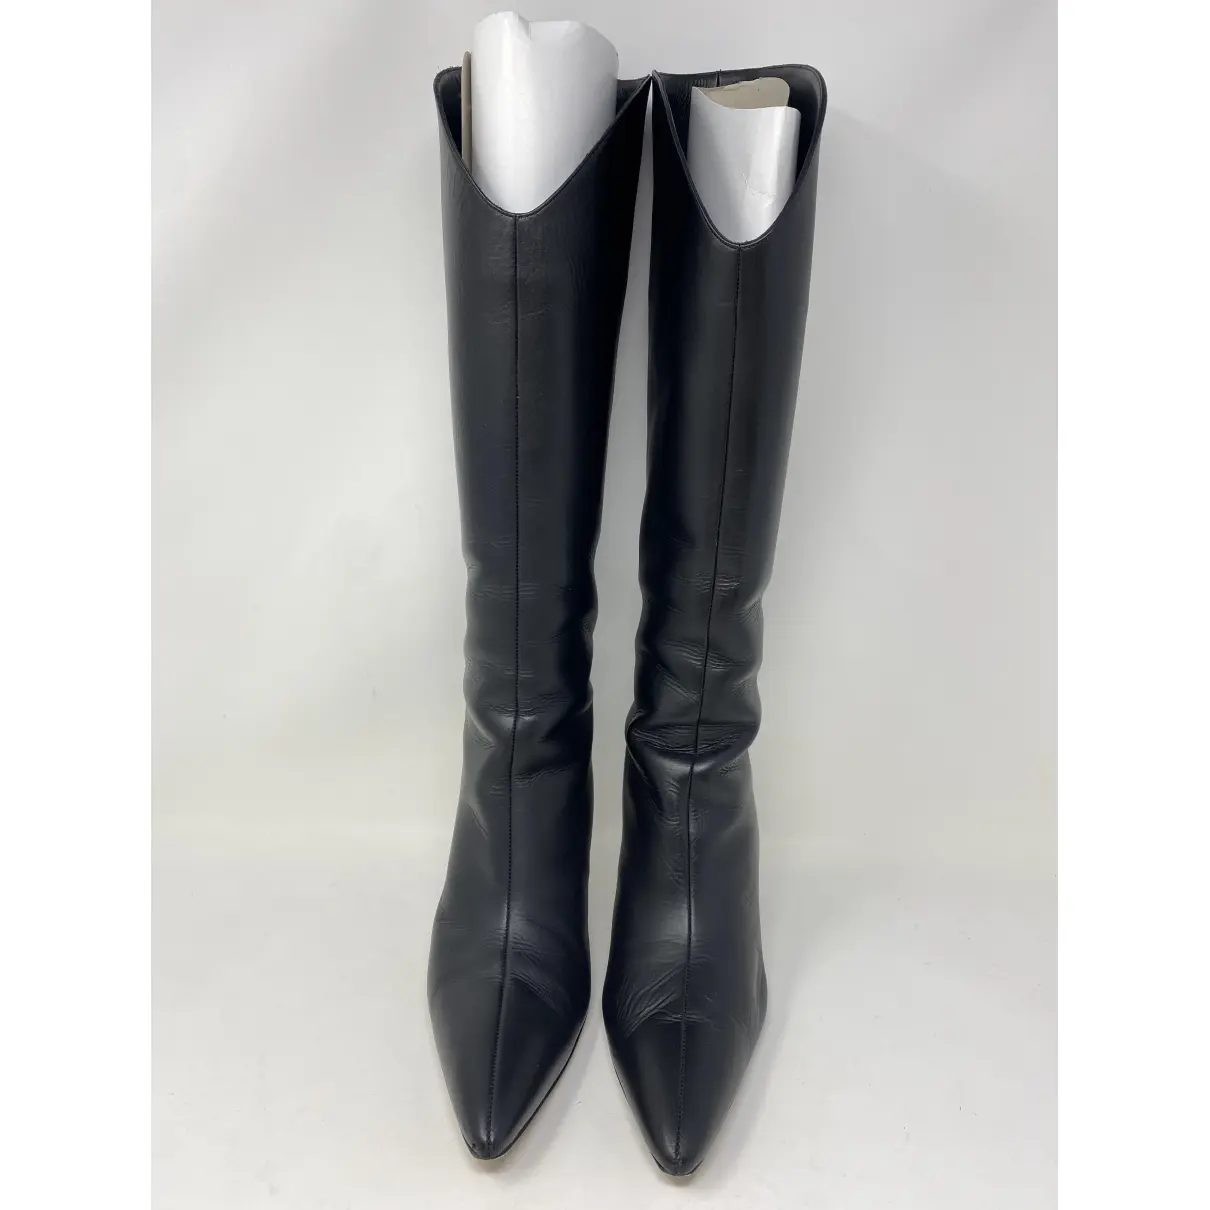 Leather boots Magda Butrym